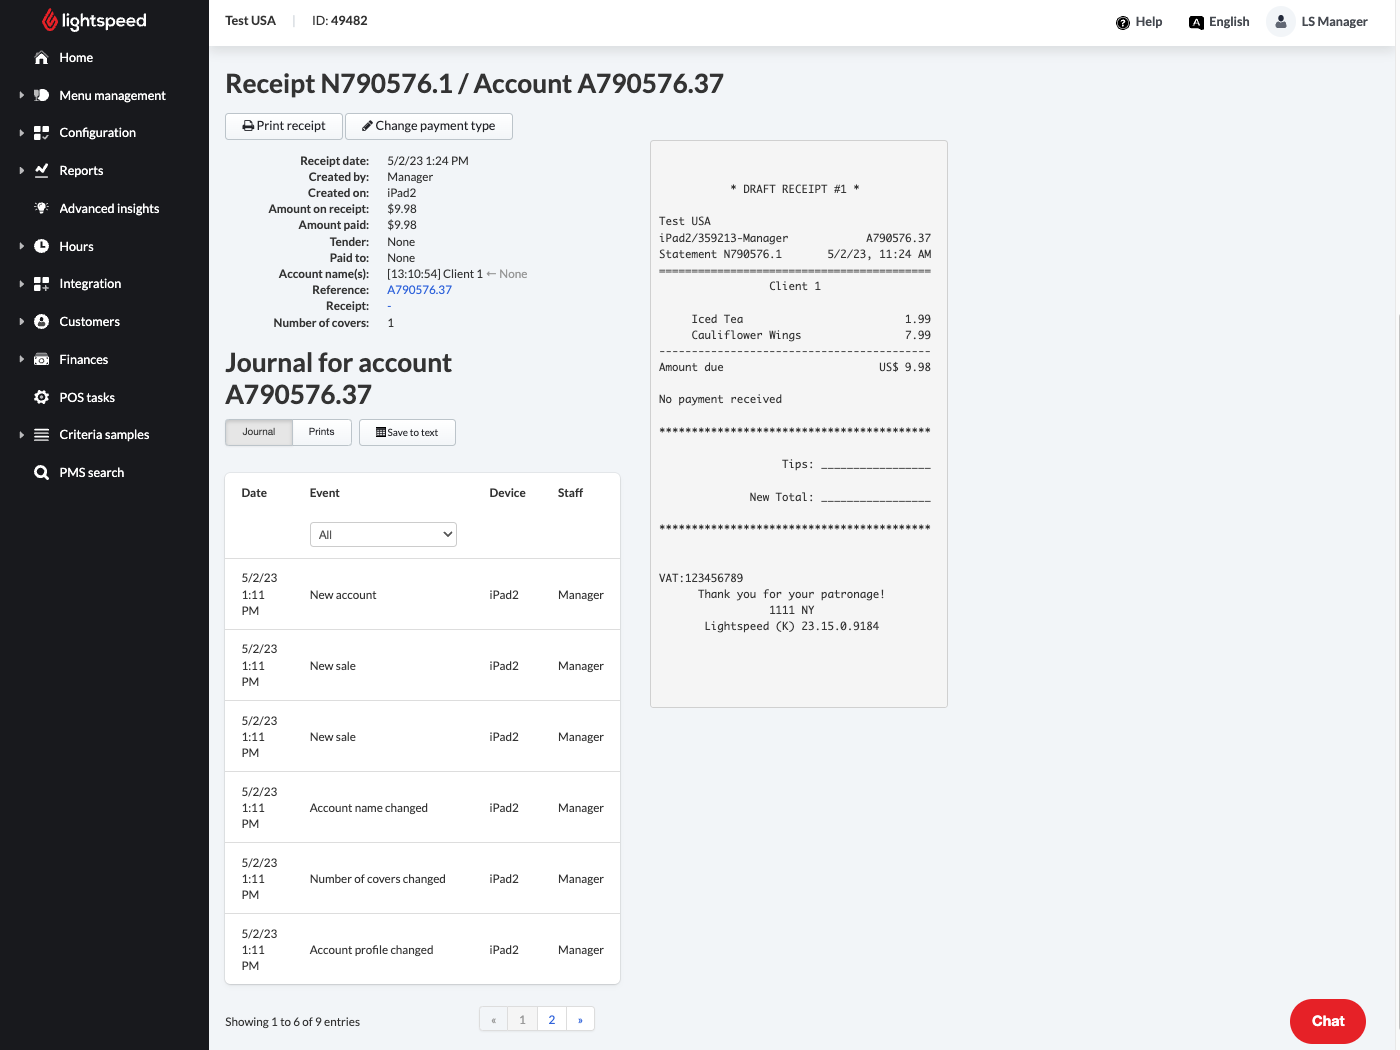 Image displays the detailed view of a receipt in the Draft Receipt report.